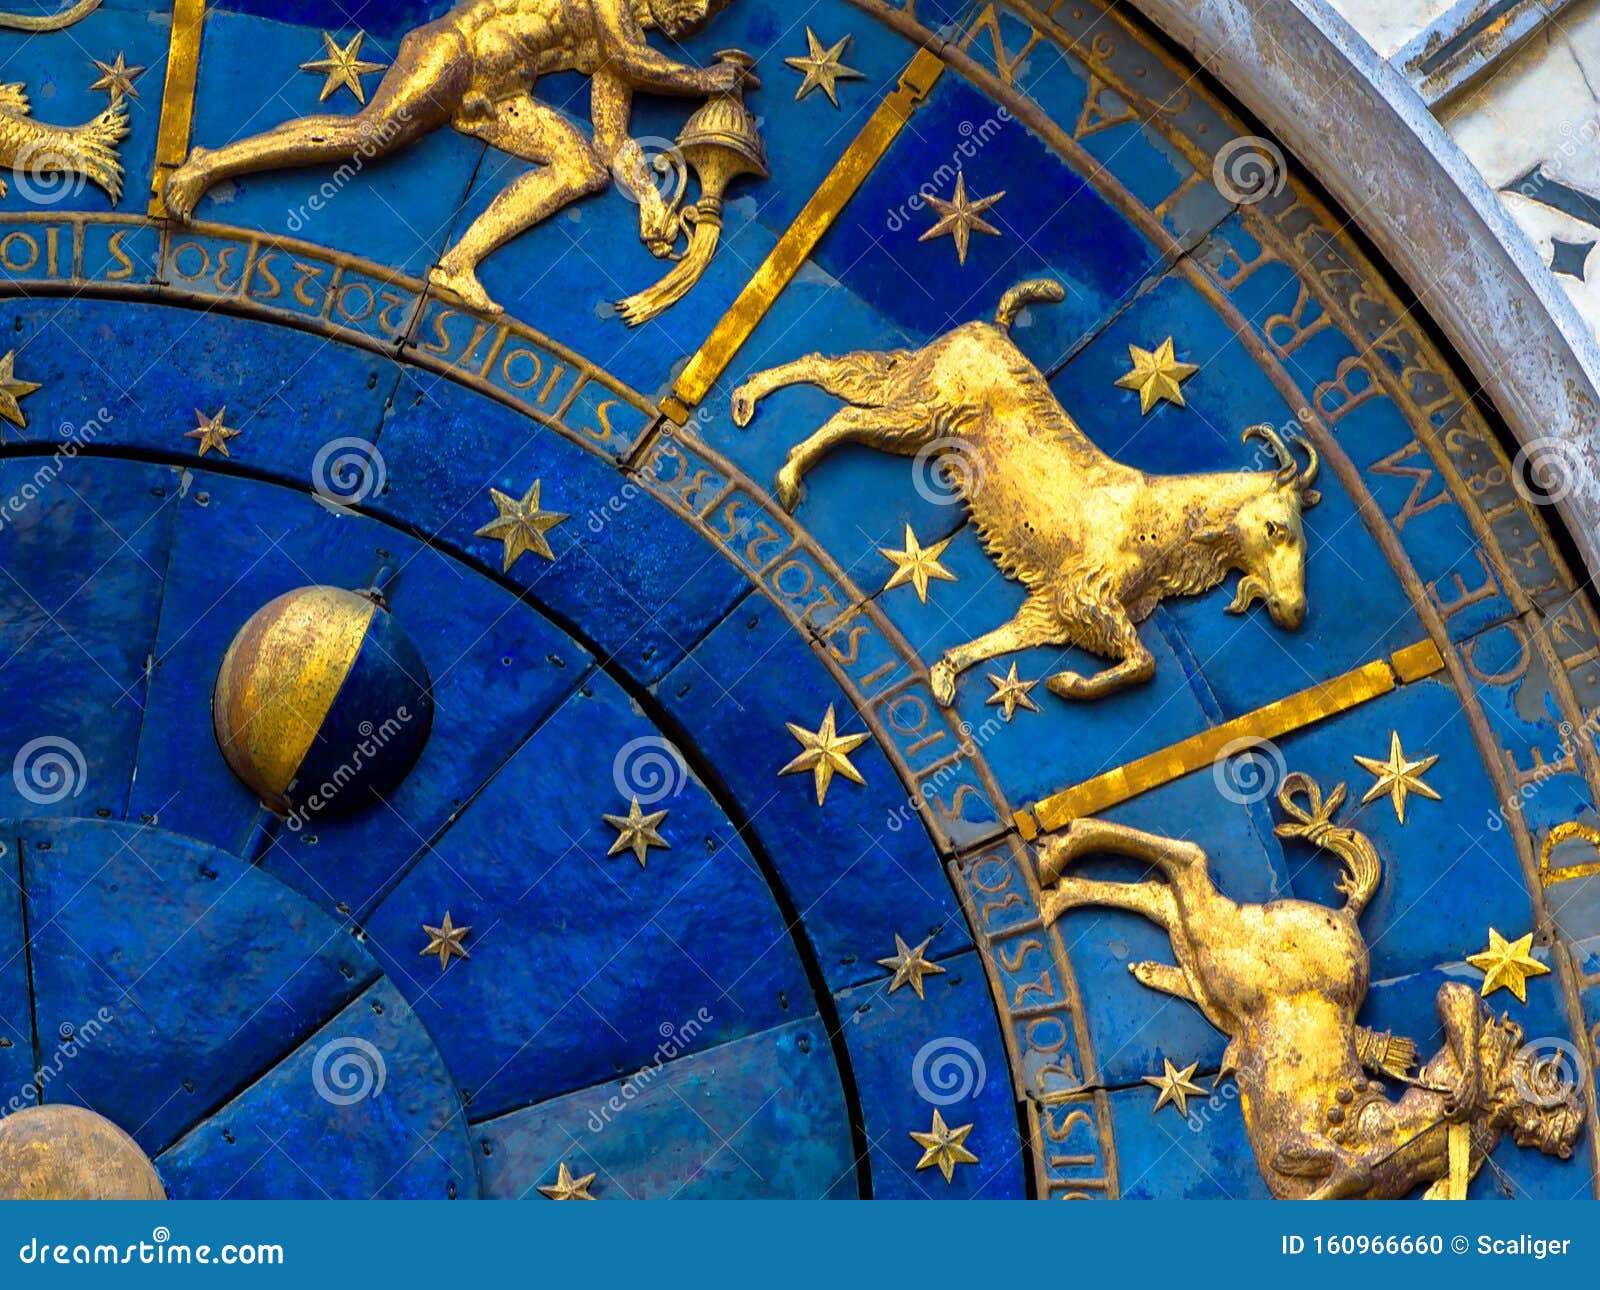 capricorn astrological sign on ancient clock. detail of zodiac wheel with moon and constellations